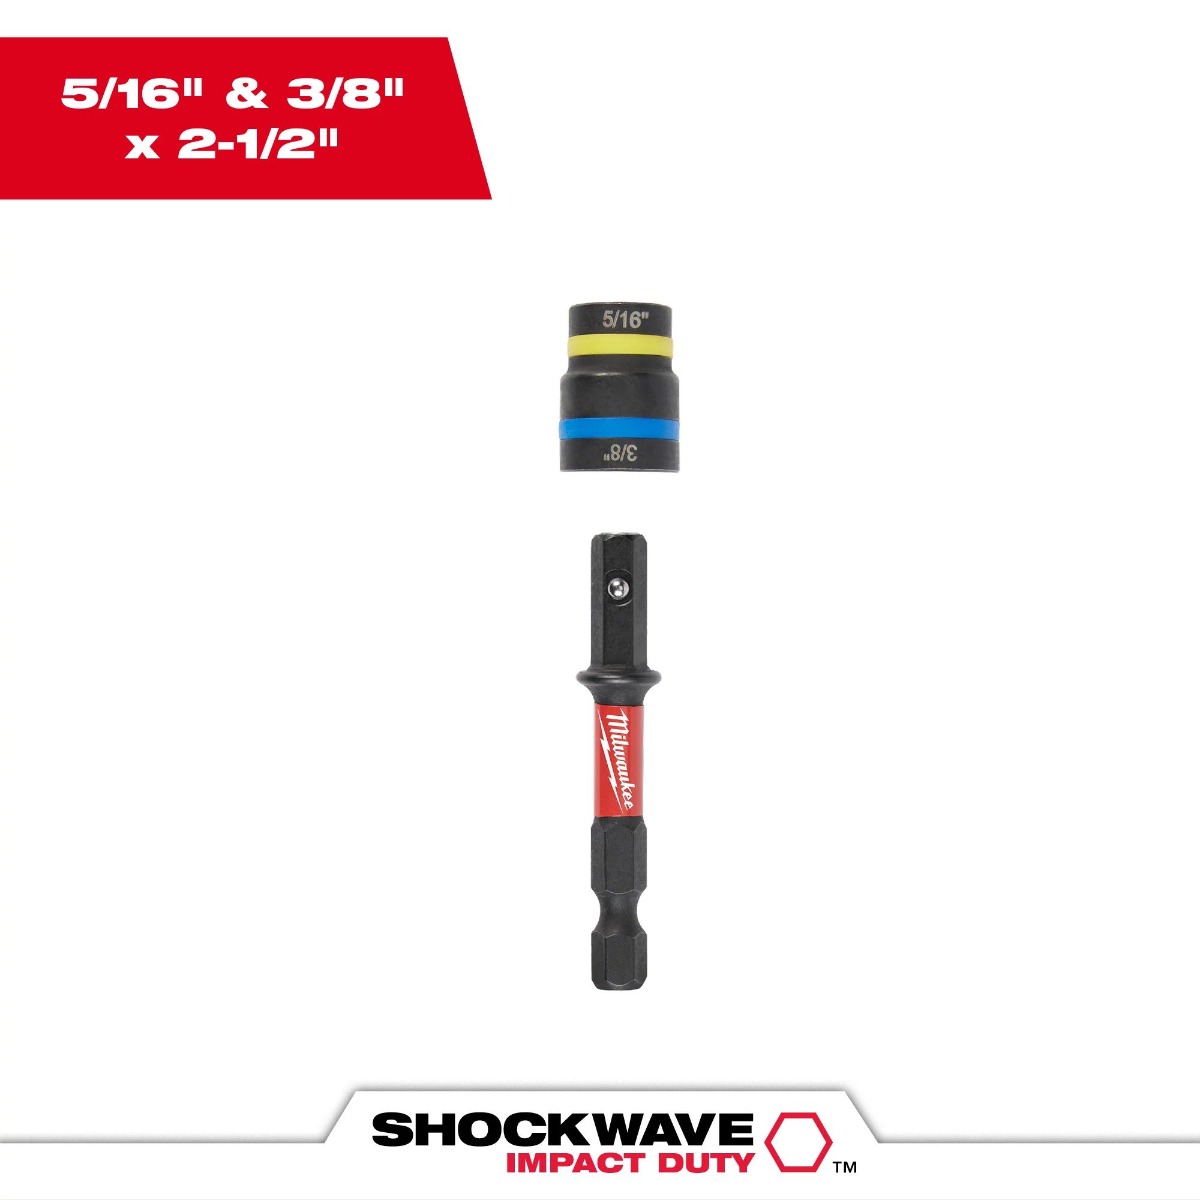 SHOCKWAVE Impact Duty™ QUIK-CLEAR™ 2-in-1 Magnetic Nut Drivers